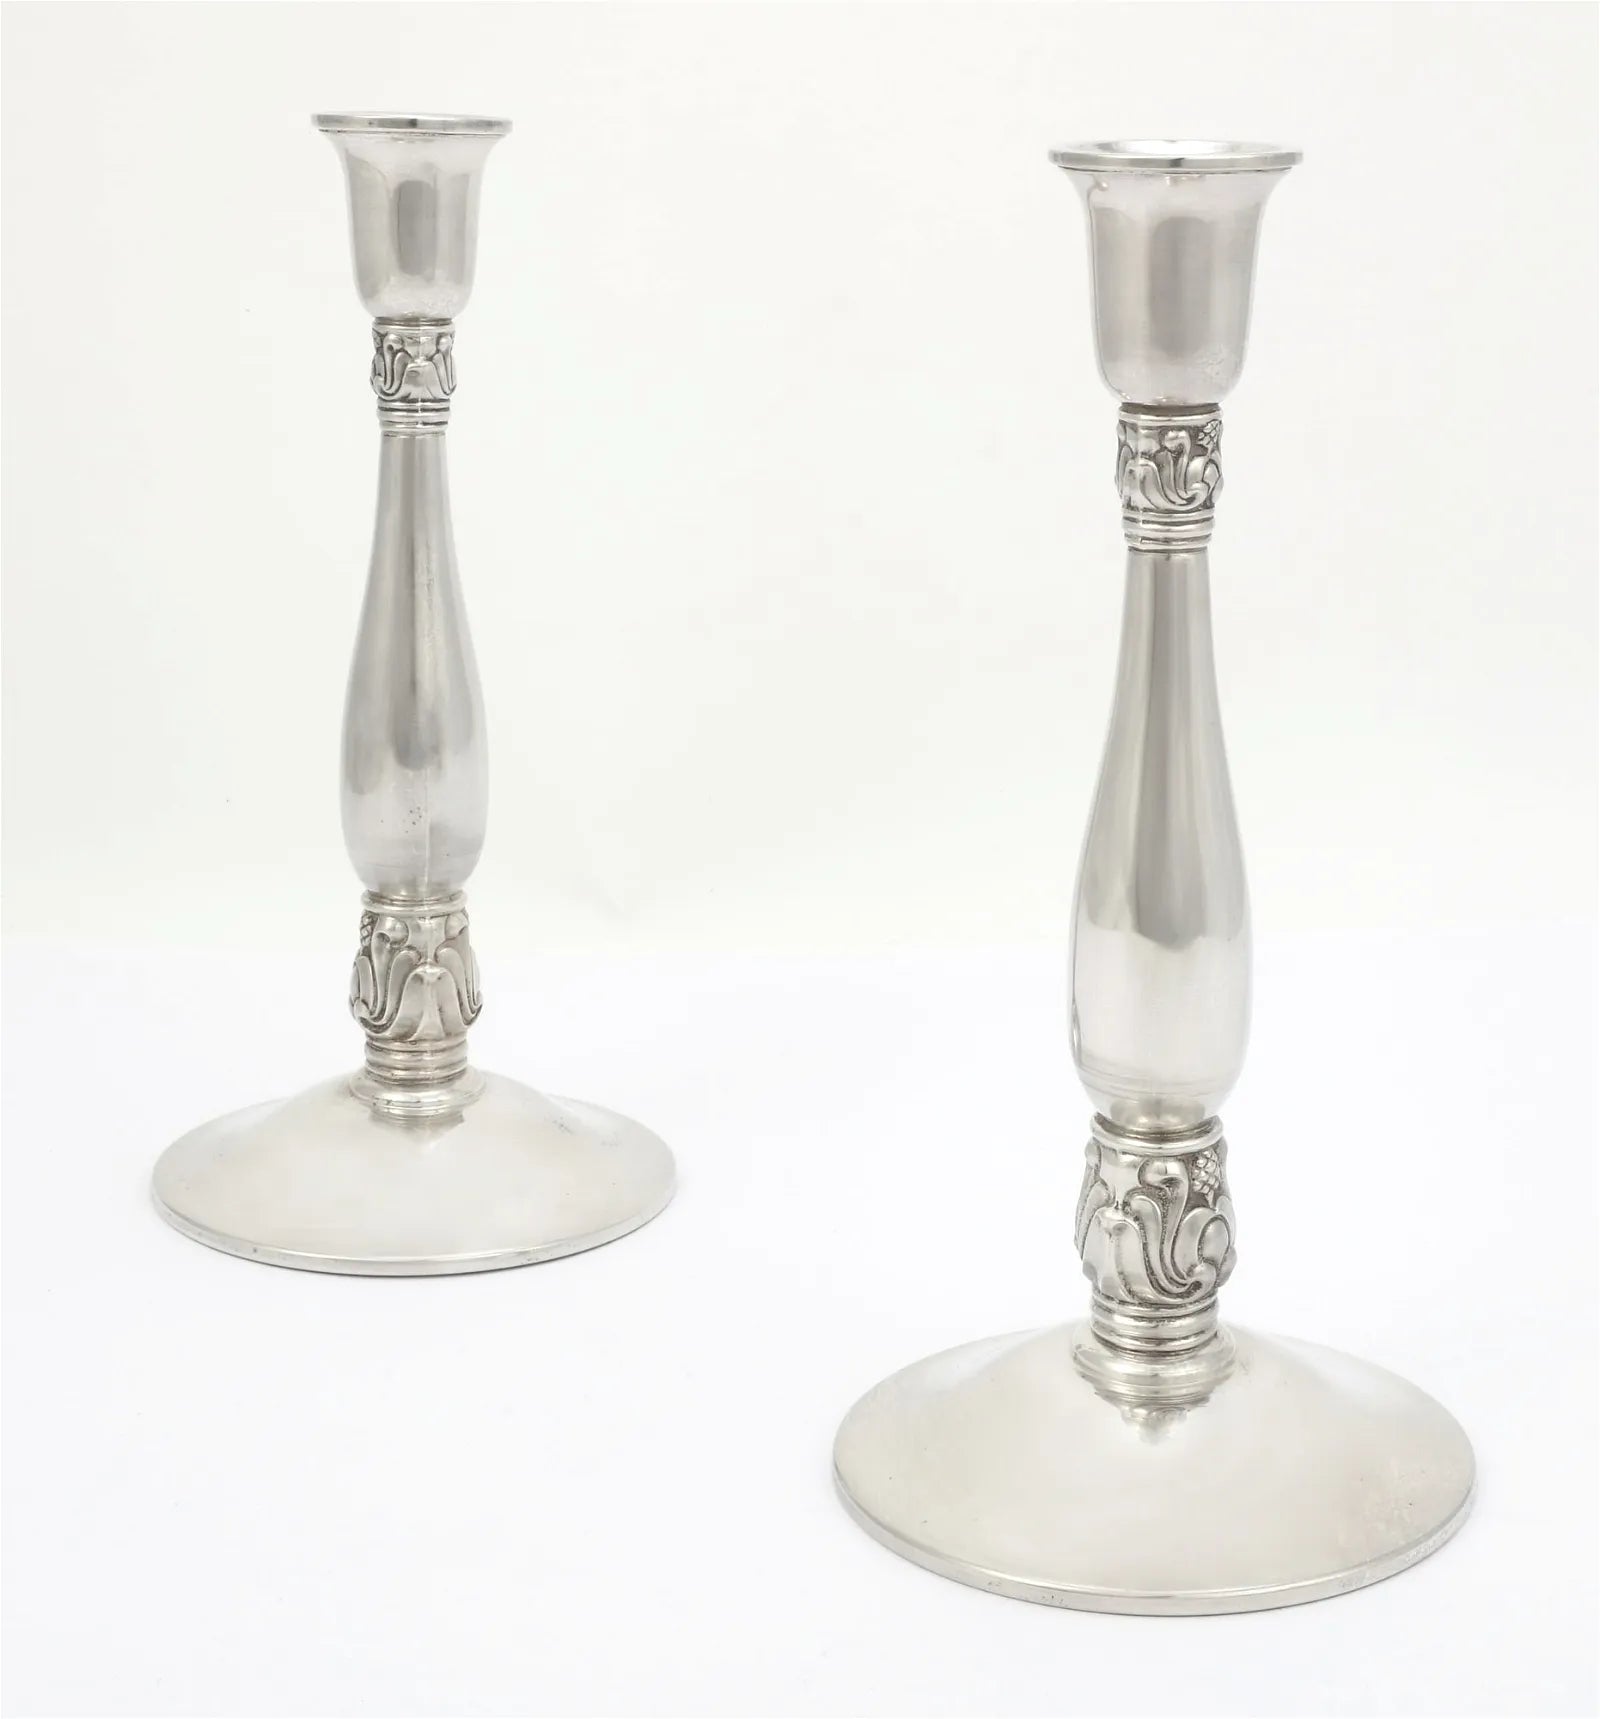 DA2-018: Pair of International Silver Weighted Sterling Silver Royal Danish Candlesticks mid 20th Century